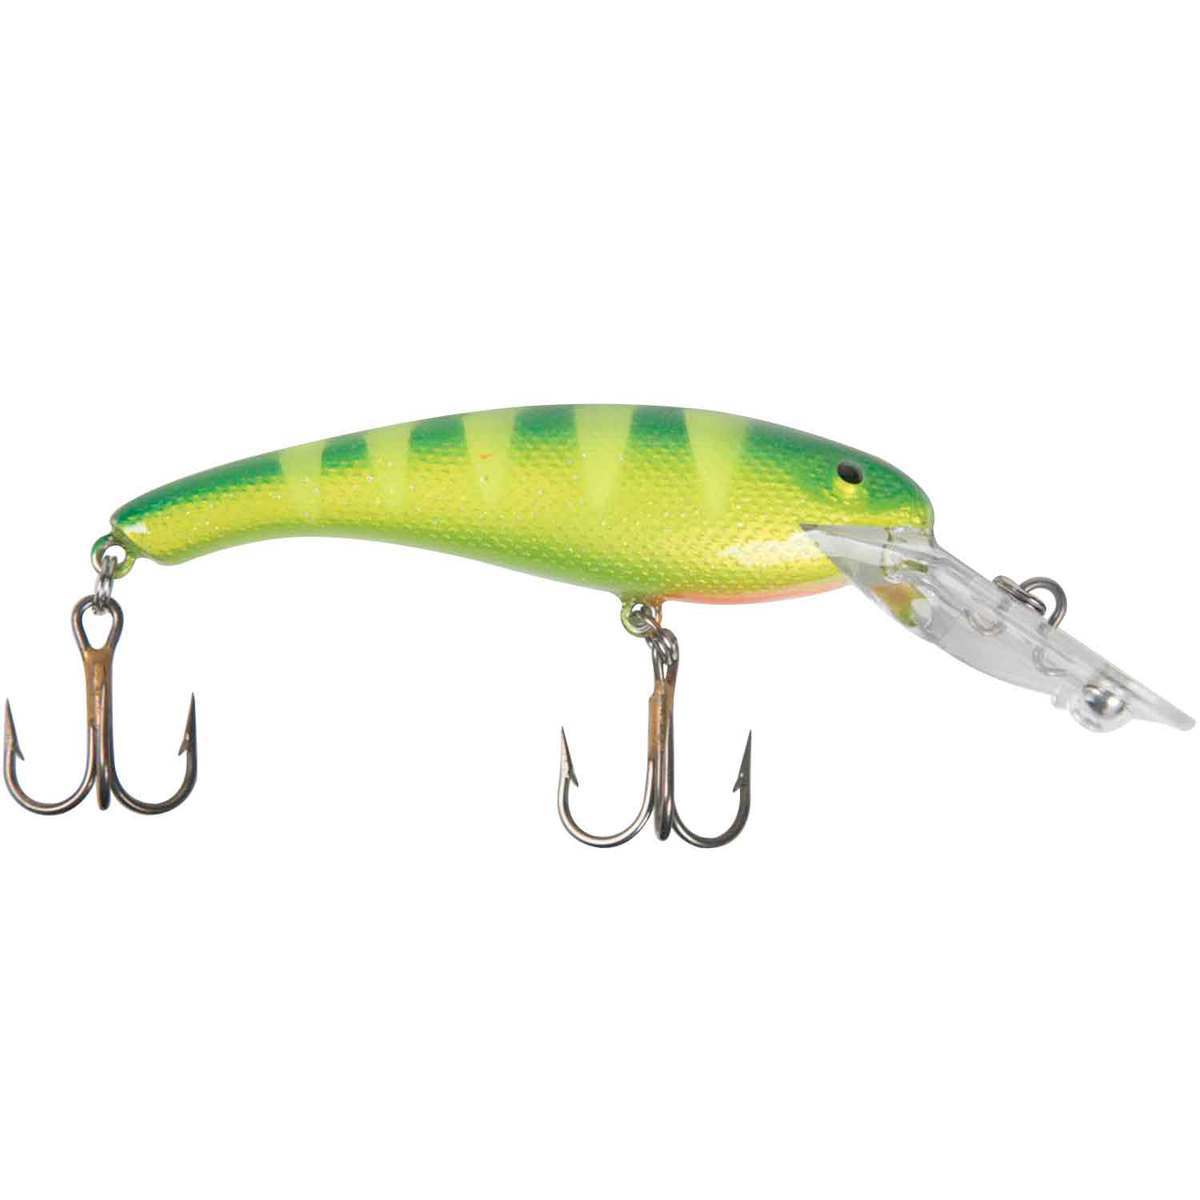 Cotton Cordell Wally Diver Crankbait - Walleye Candy, 1/4oz, 2-1/2in, 6-8ft